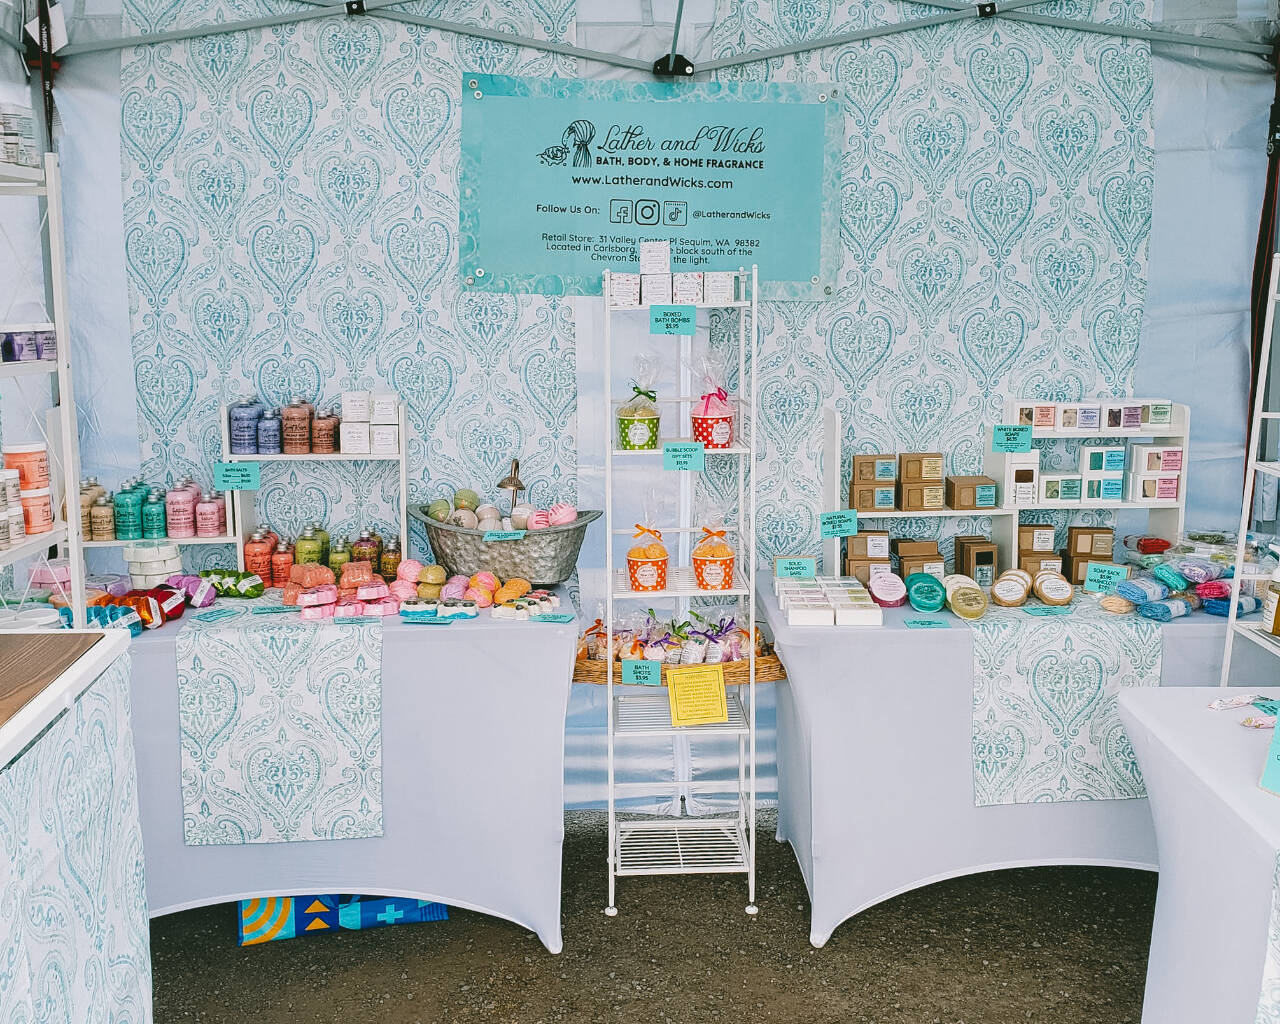 Photo courtesy of Katrina Robb / A peek inside the Lather and Wicks booth. With its wide product line, Lather and Wicks provides high-quality soaps to best suit your needs and lifestyle.